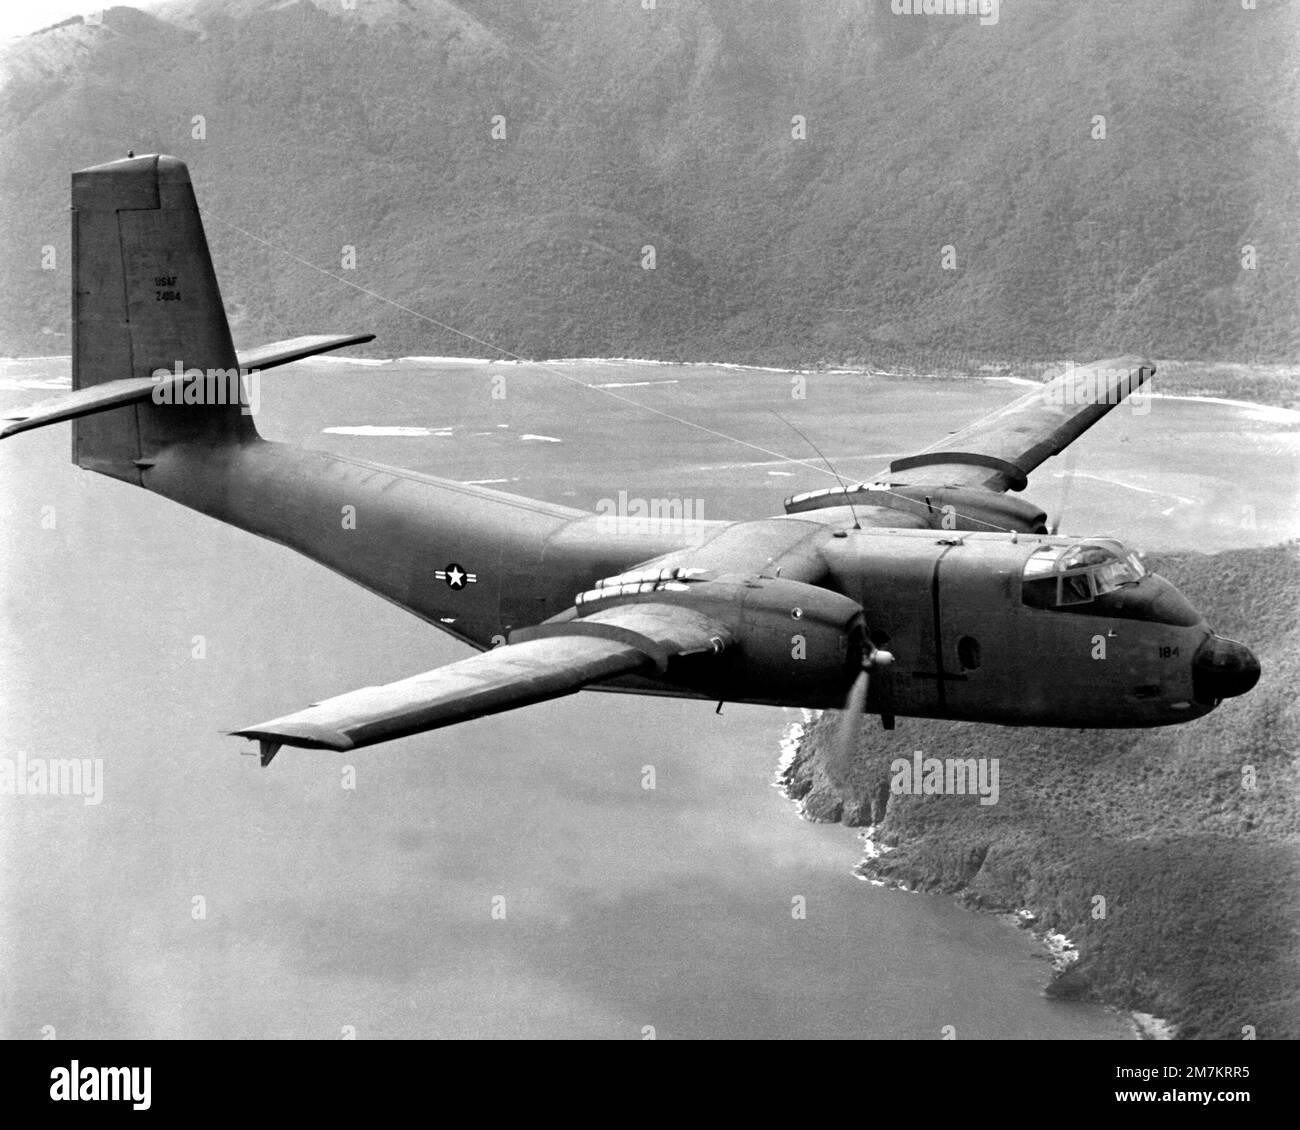 A C-7 Caribou aircraft, transferred from the U.S. Army to the Air Force on Jan. 1, is used for airlifting supplies to forward outposts in Vietnam. With a maximum payload of three tons, the C-7A can take off and clear a 50-foot obstacle in about 1,200 feet. The aircraft, used for landing at short, unimproved airfields, can land on a 1,000-foot runway. Base: Saigon Country: Viet Nam (VNM) Stock Photo